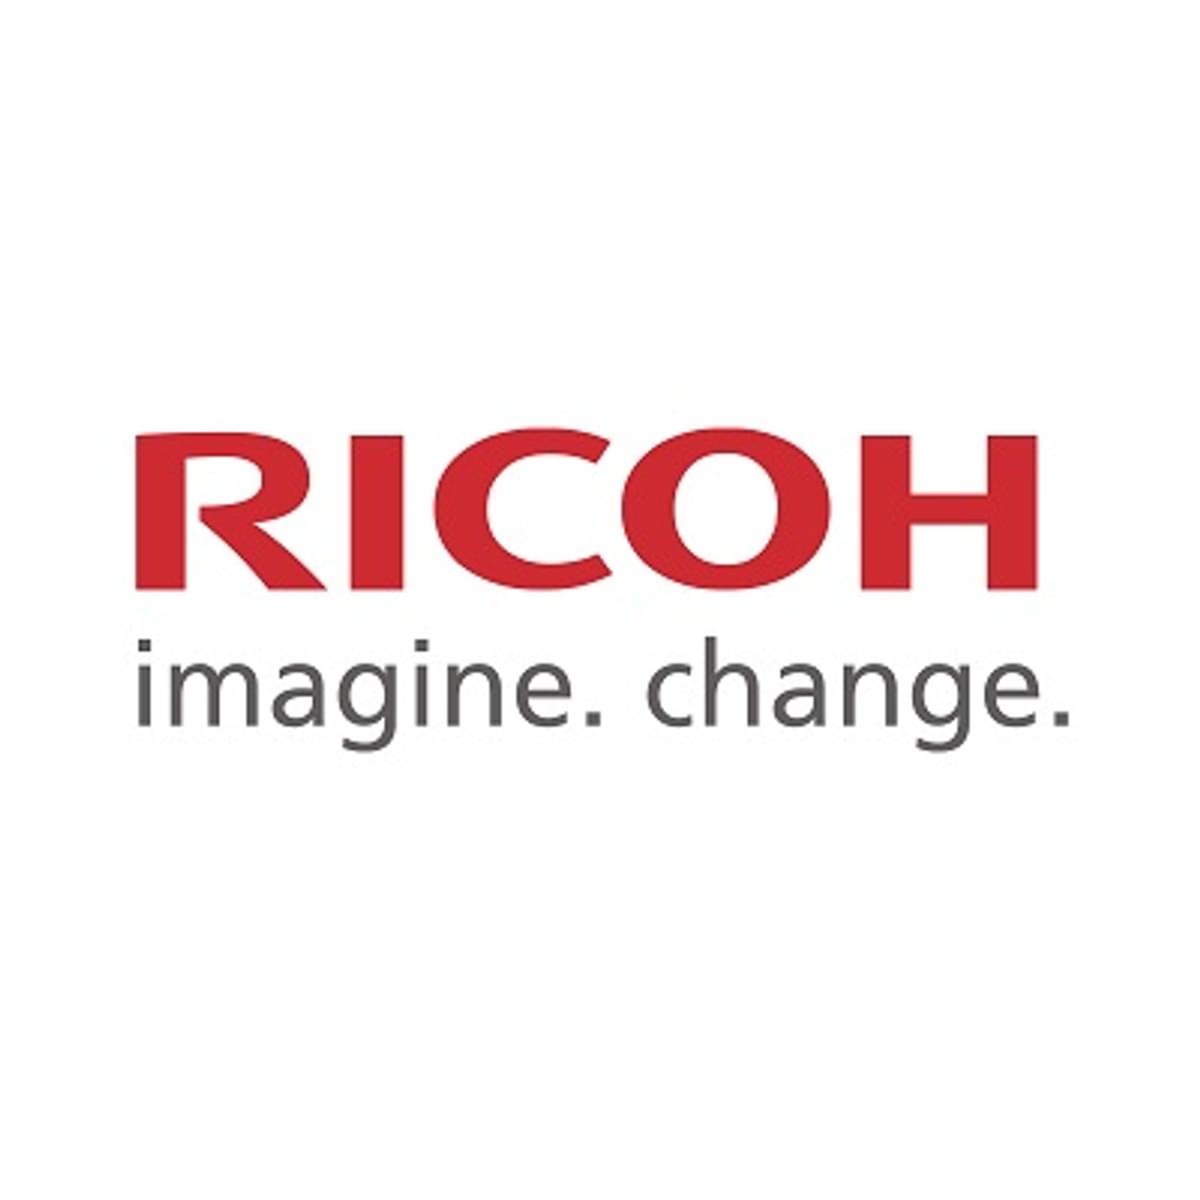 Ricoh neemt Apex over image